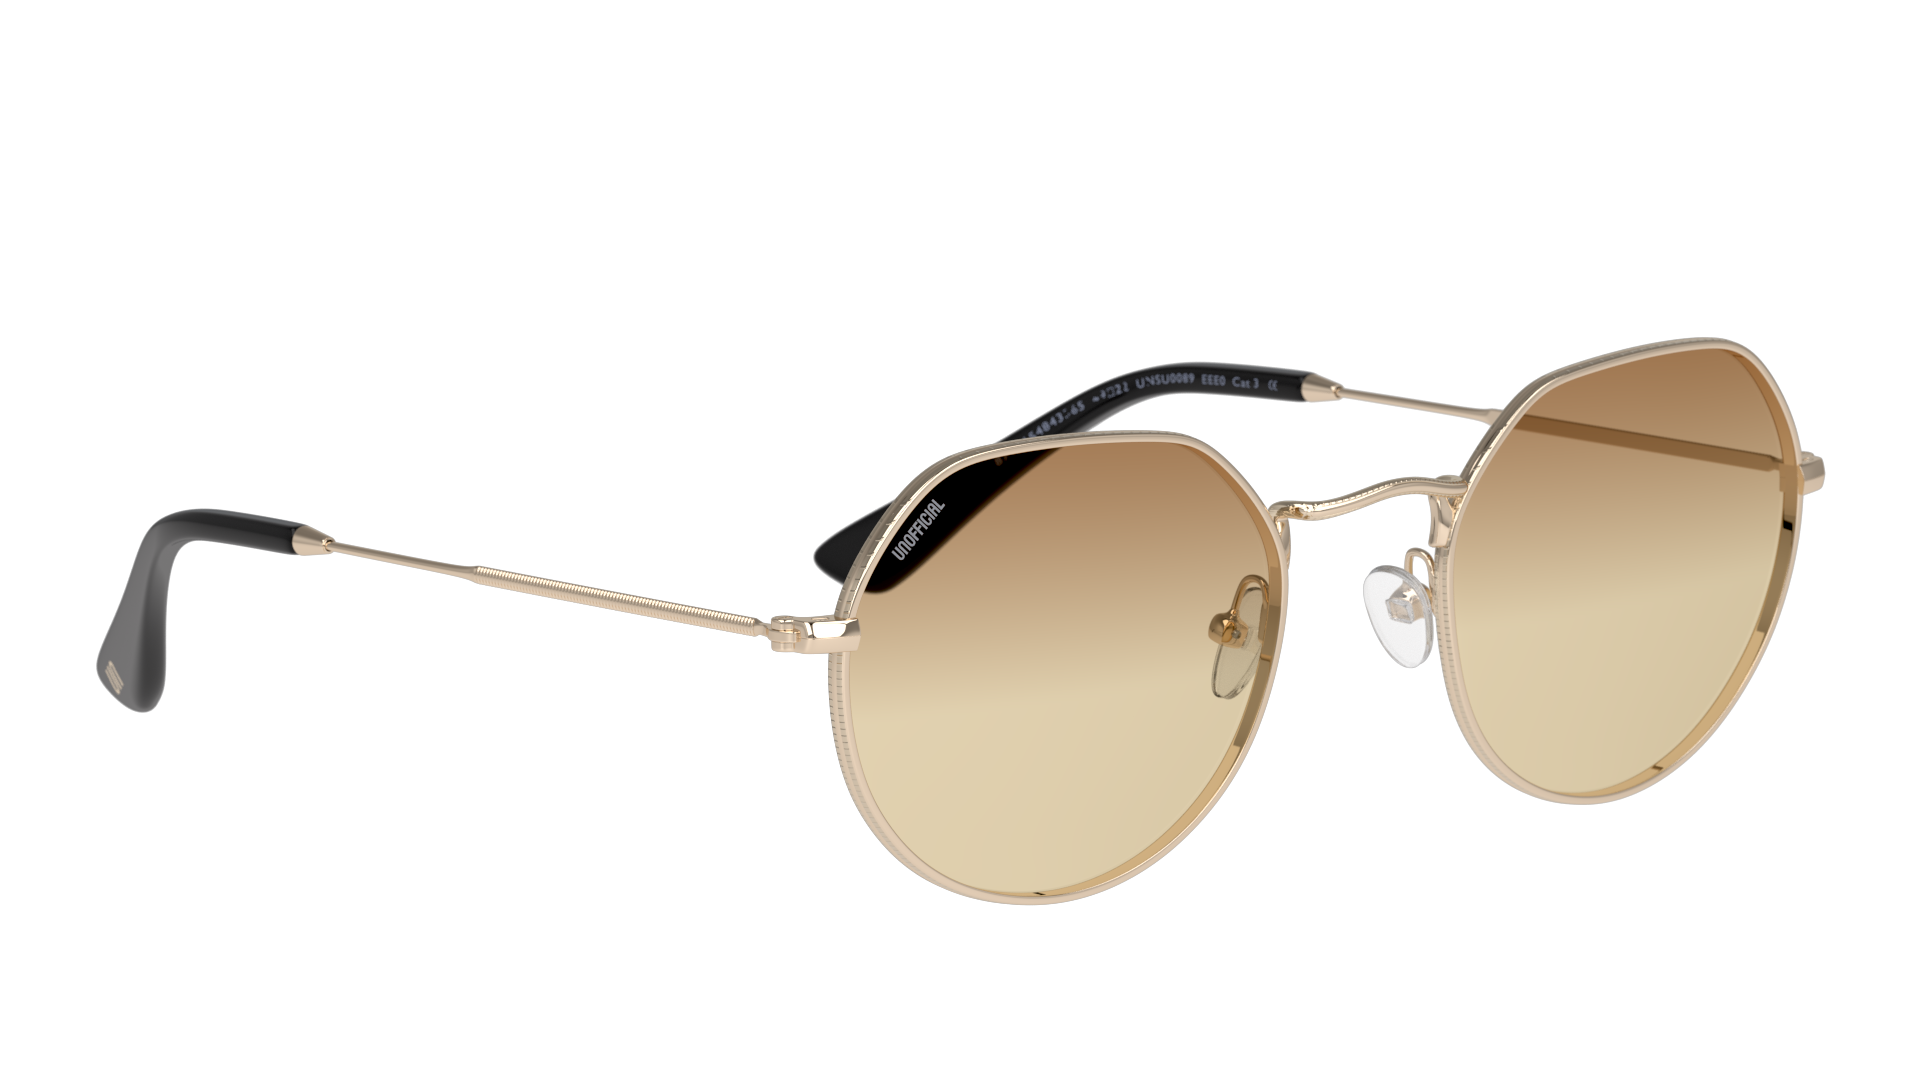 Angle_Right01 Unofficial UNSU0103 Sunglasses Brown / Gold